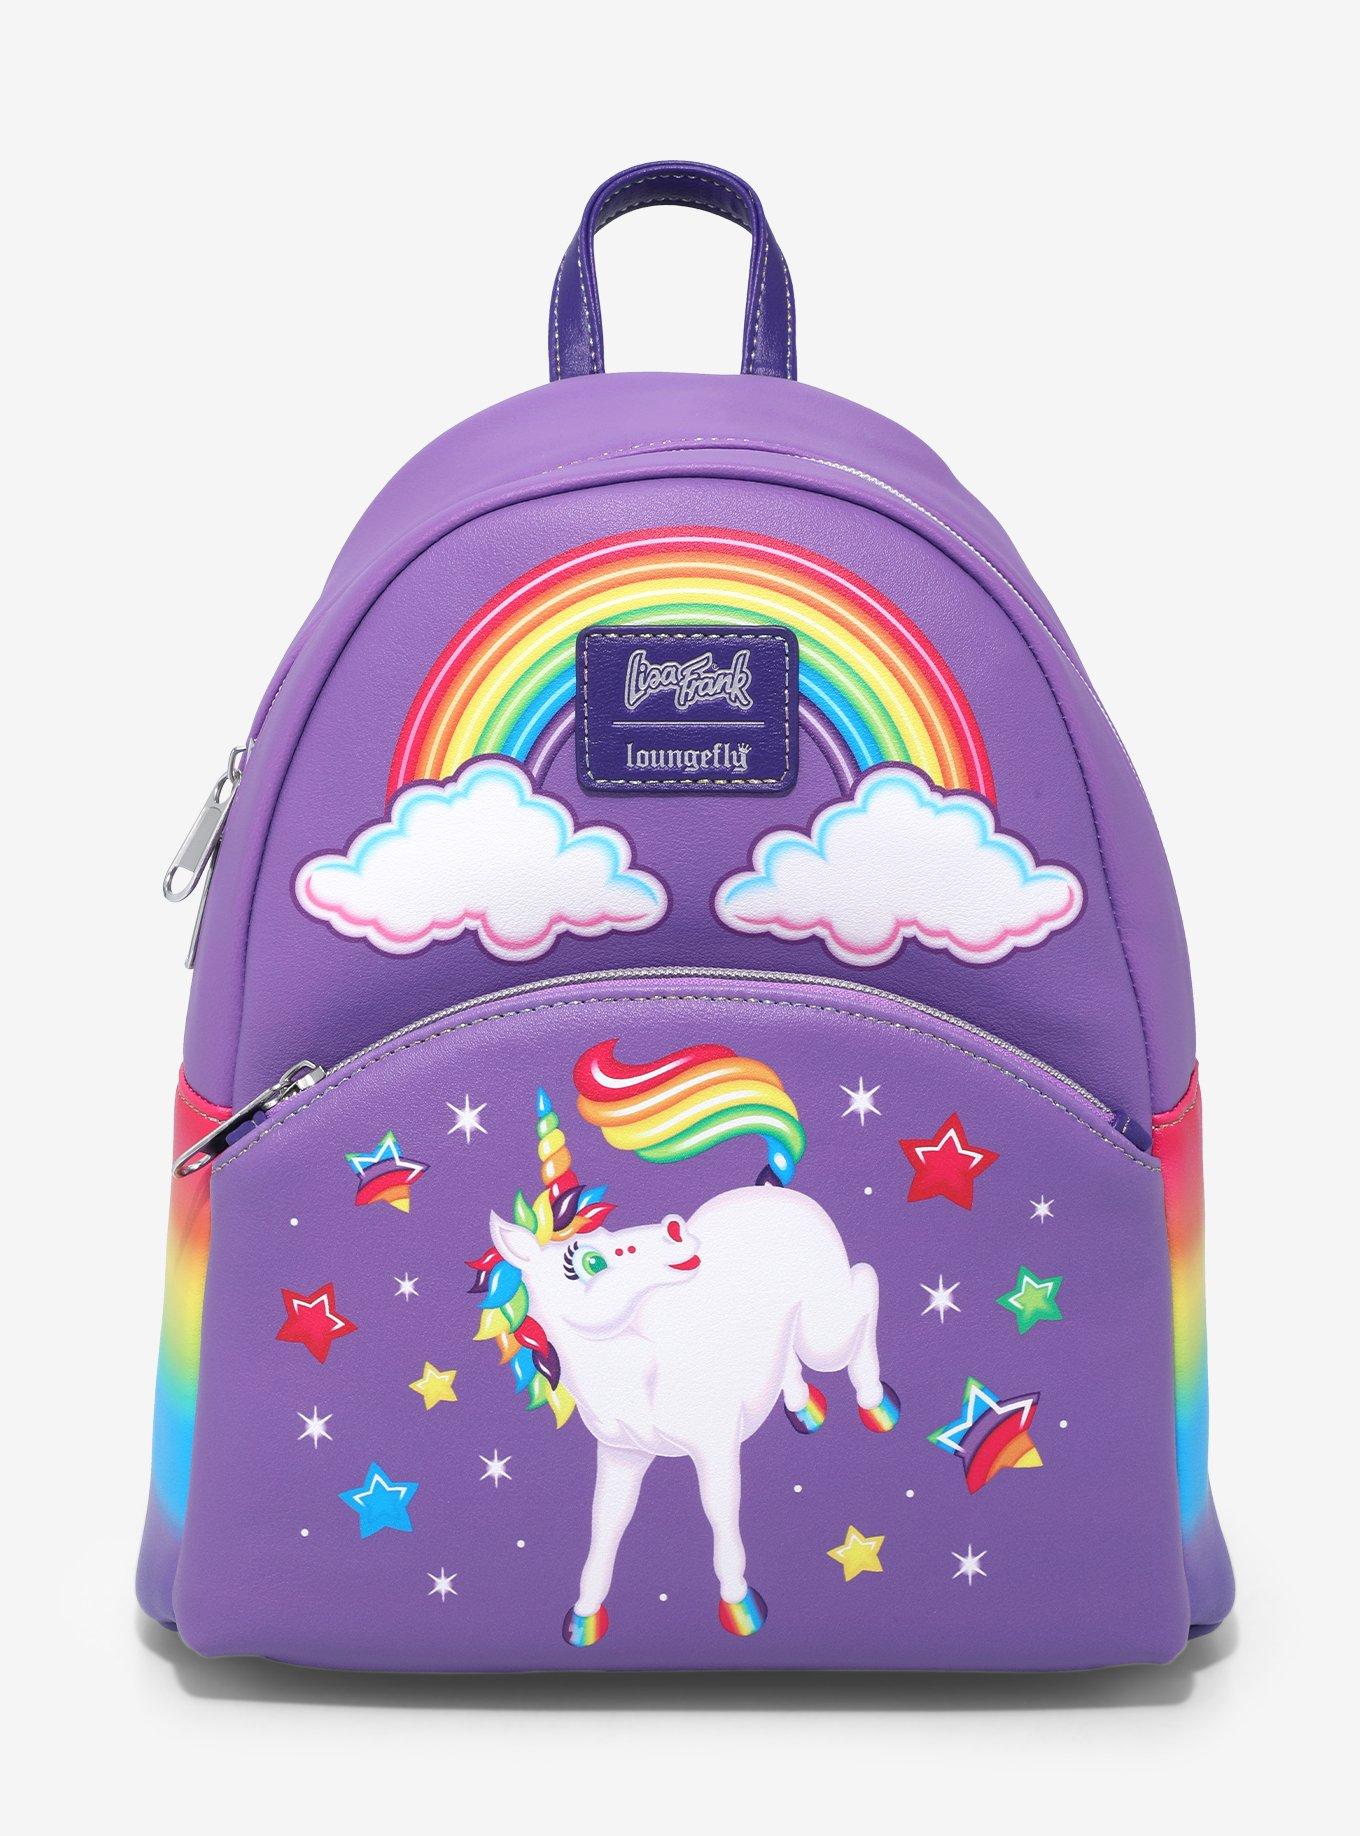 Newest purchase the Lisa Frank loungefly Halloween bag. So excited to get  this bag. I cannot wait. : r/Loungefly